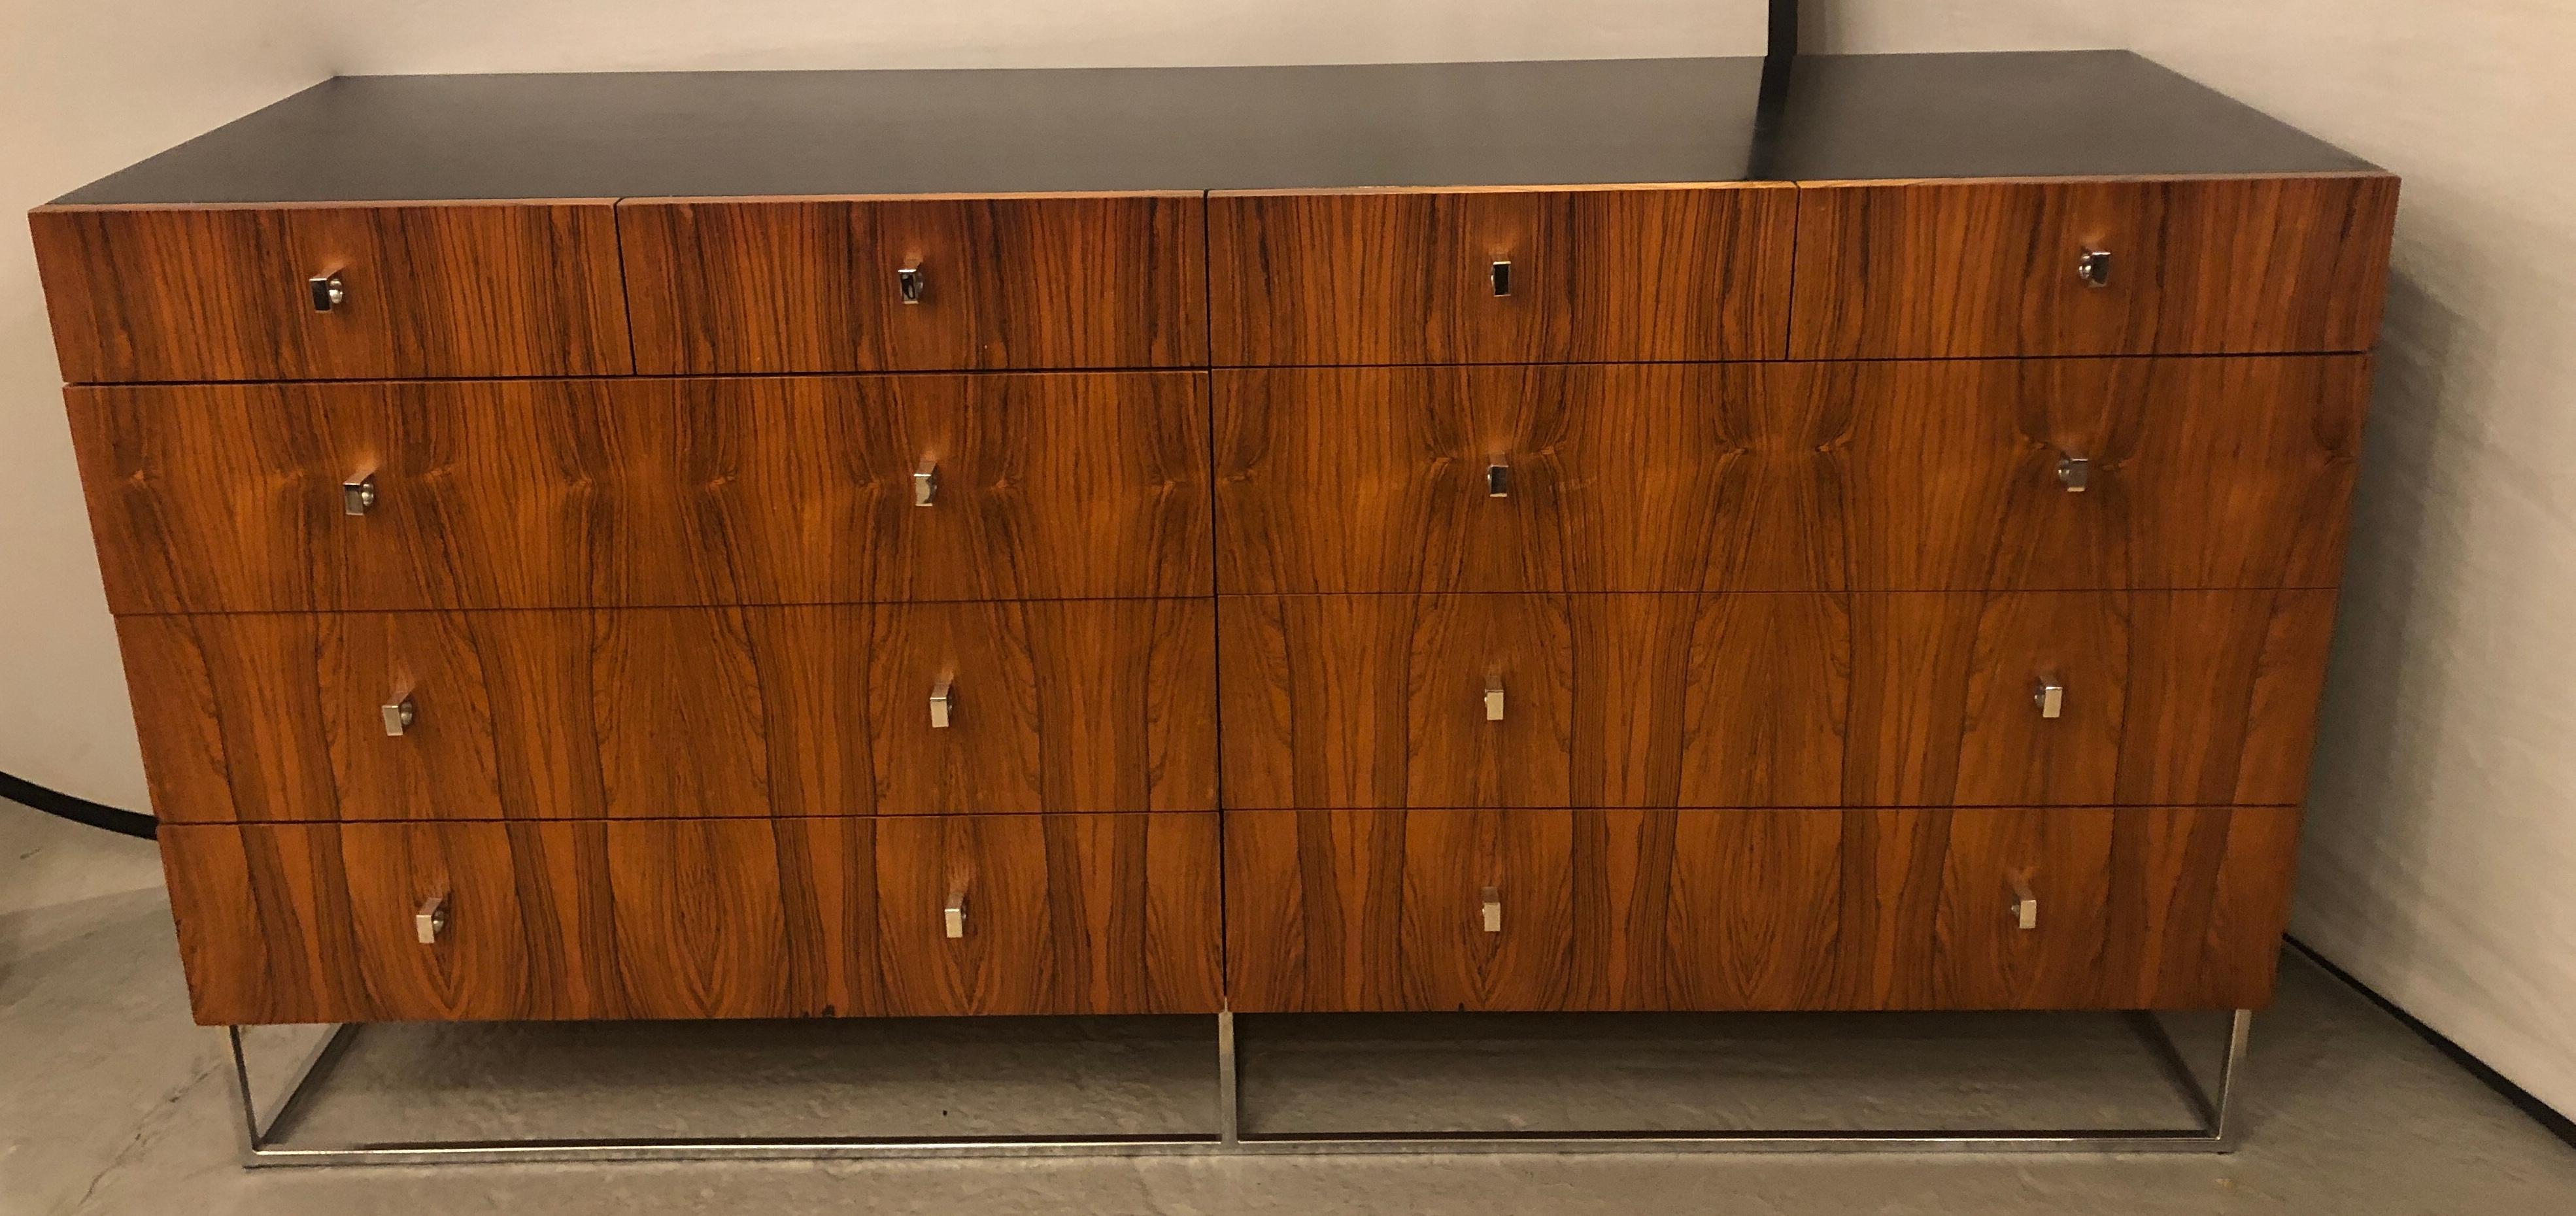 Hollywood Regency style Rougier rosewood and black lacquer credenza chest, dresser or serving cabinet sitting on a chrome base with chrome drawer pulls. The whole having four upper drawers over six larger drawers. Plenty of storage on this fine and